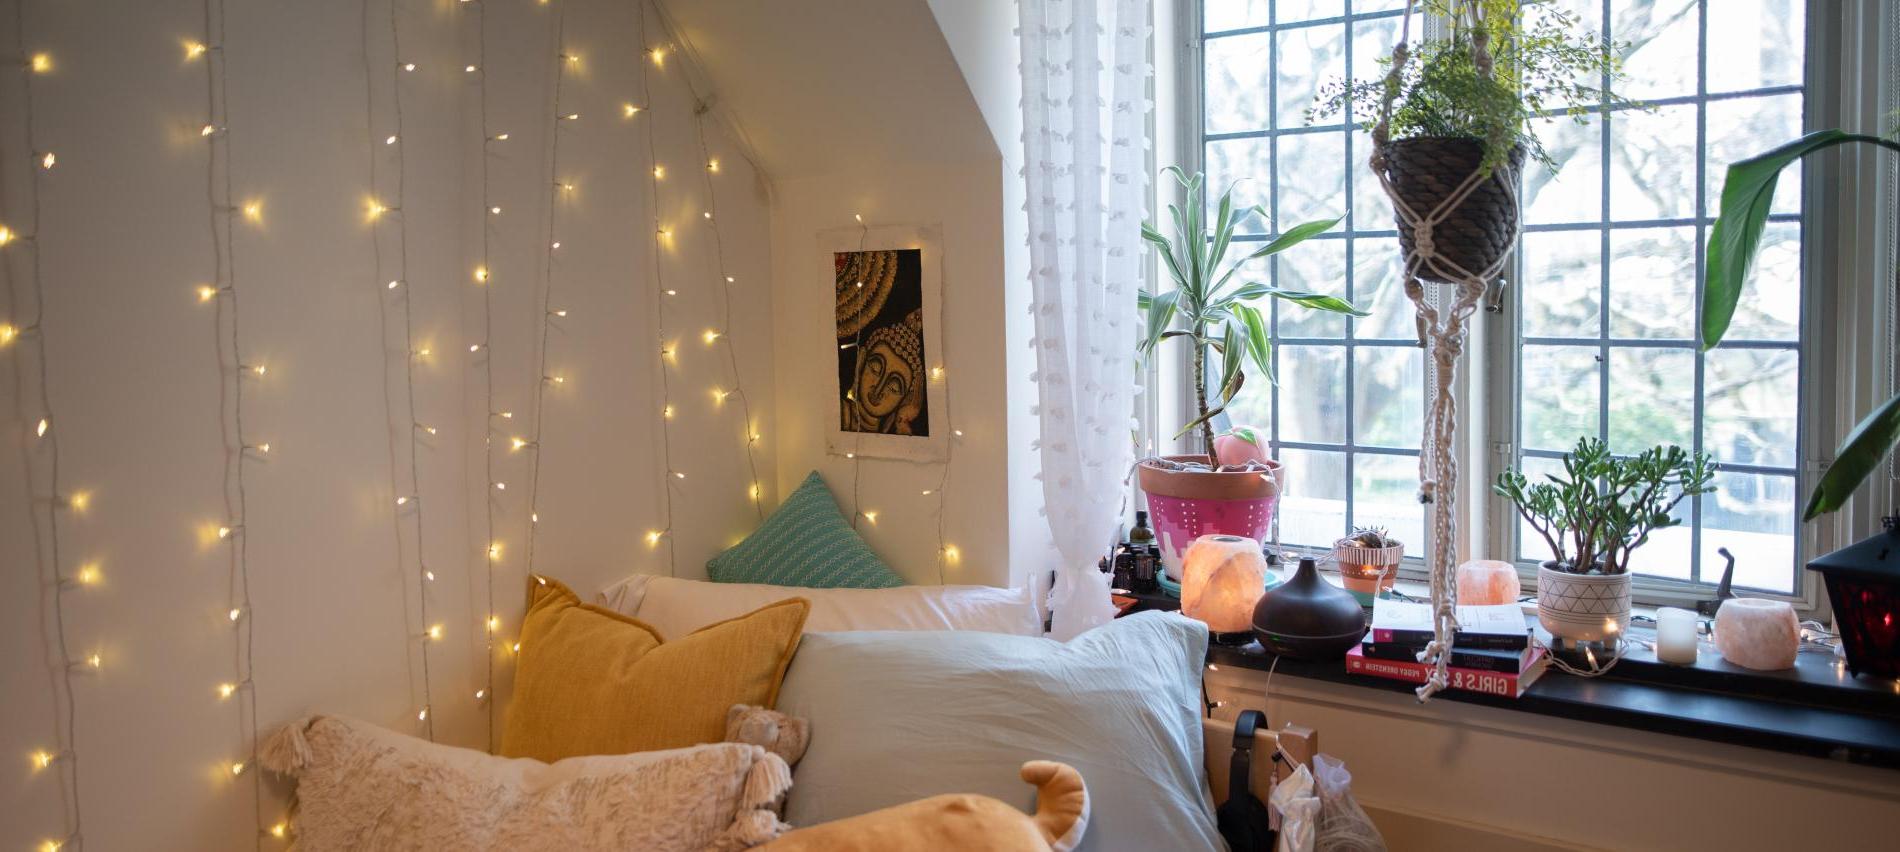 Dorm Room with twinkle lights and plants